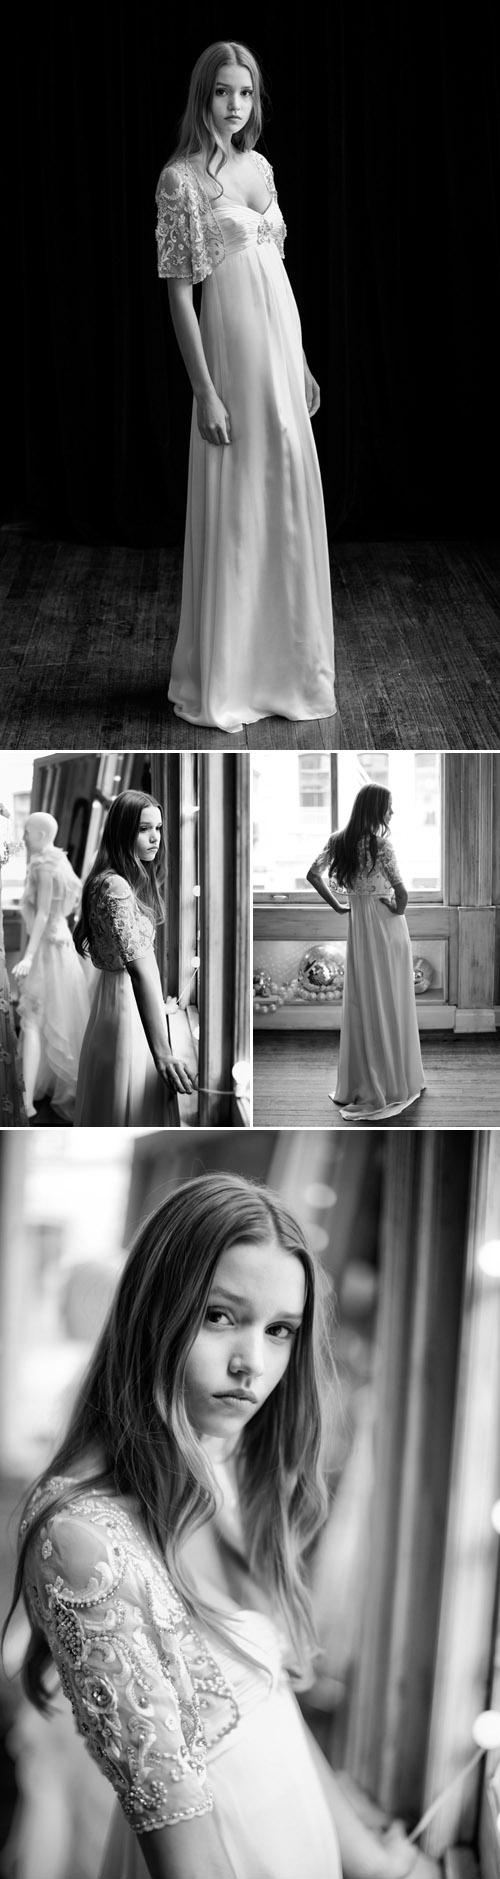 Temperley London bridal collection and New York boutique, vintage-inspired wedding dresses, photos by John and Joseph Photography